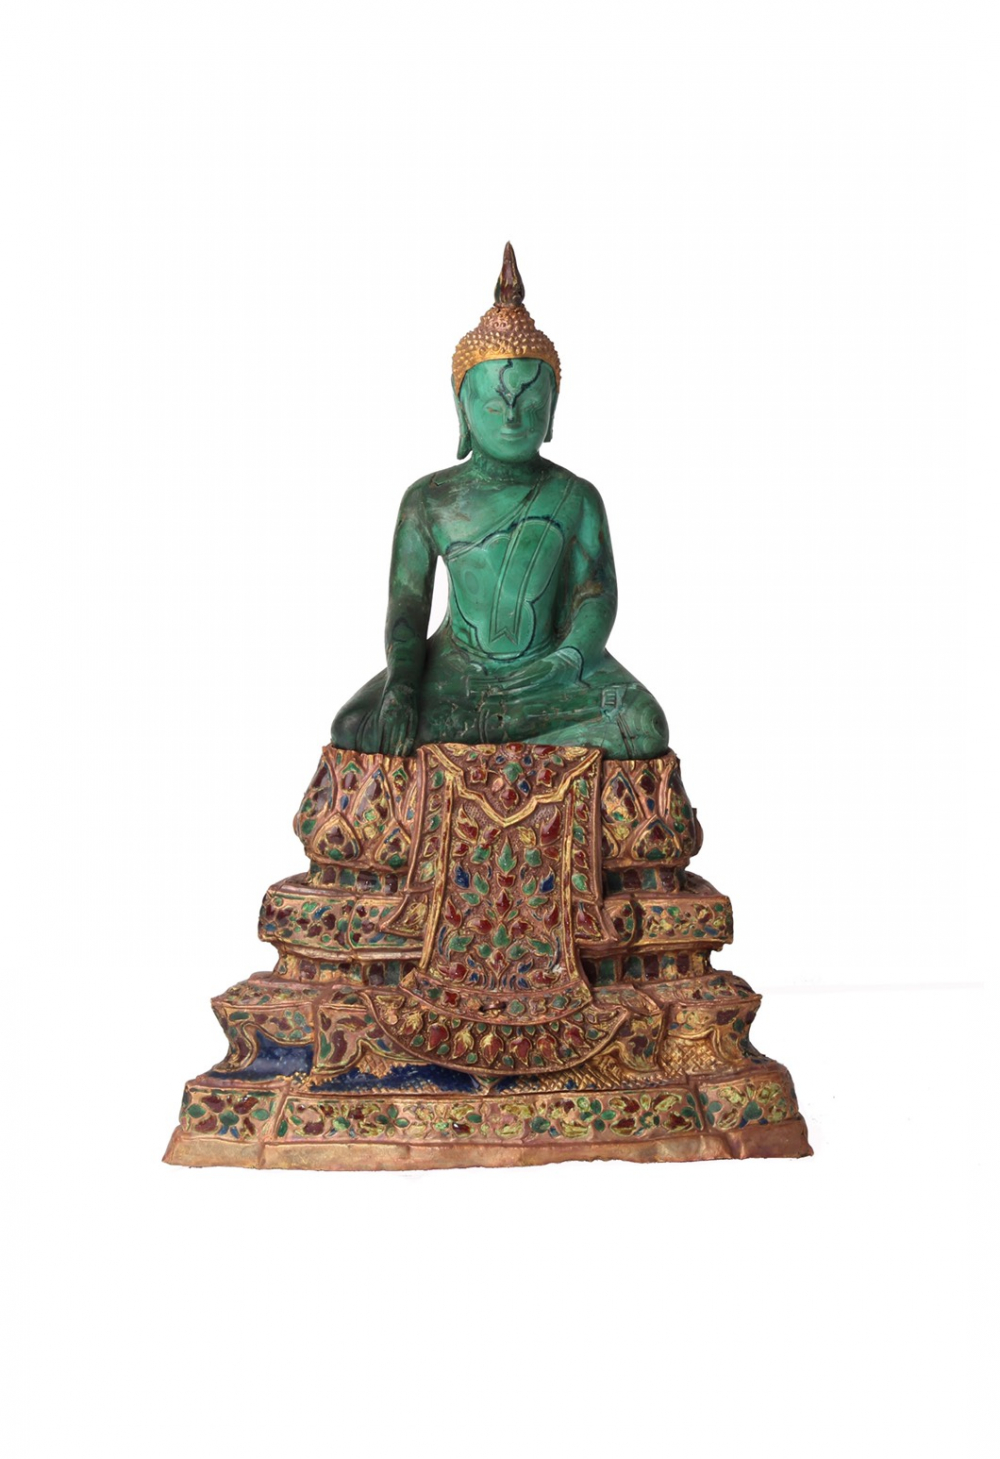 new-year-blessing-planned-for-buddha-artefacts-the-nation-5.jpg